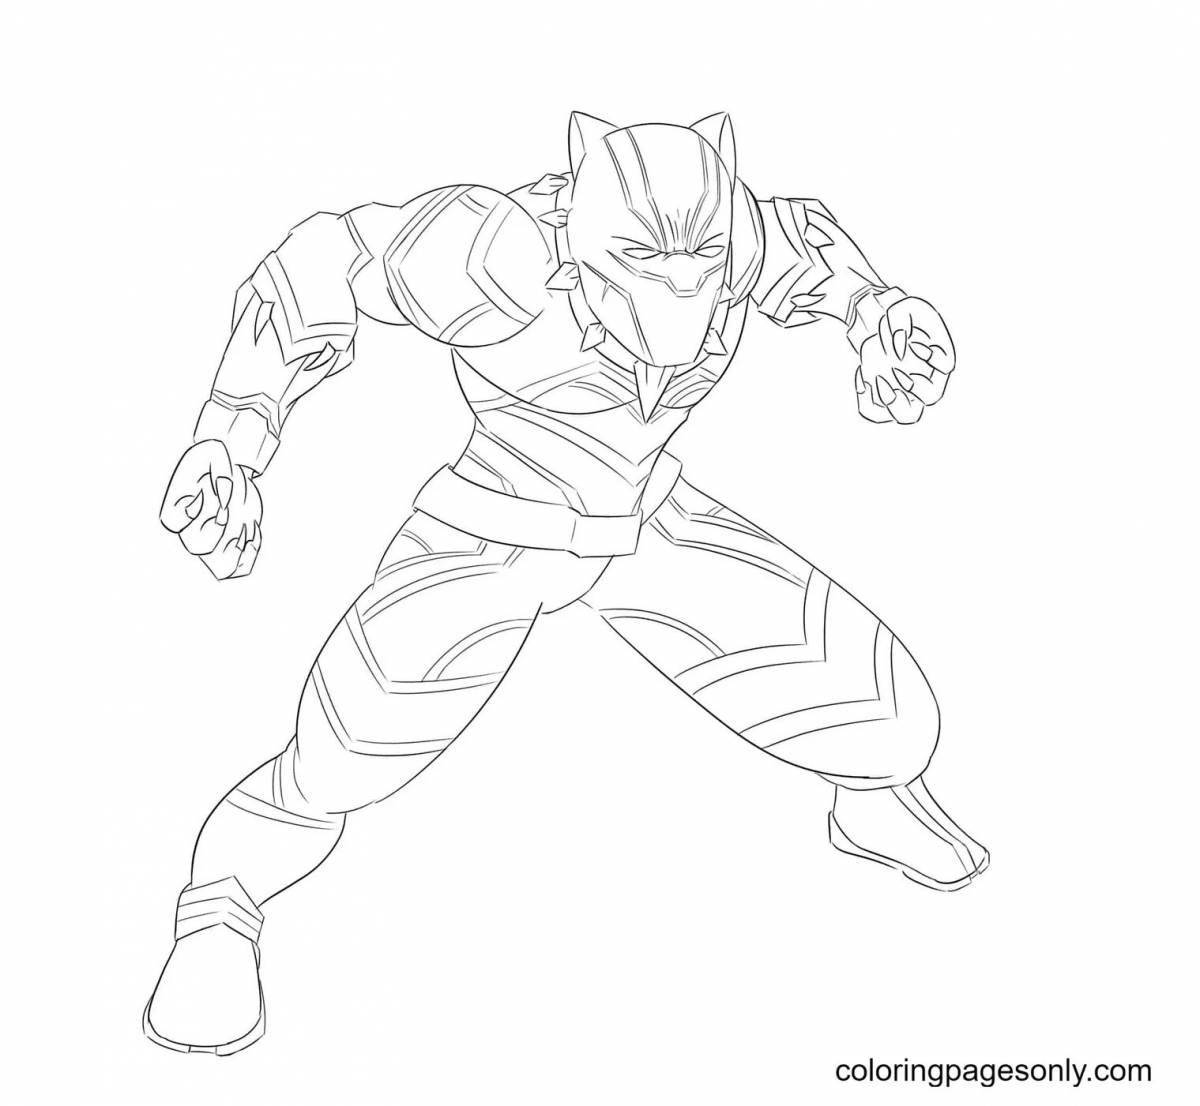 Black panther coloring book for kids